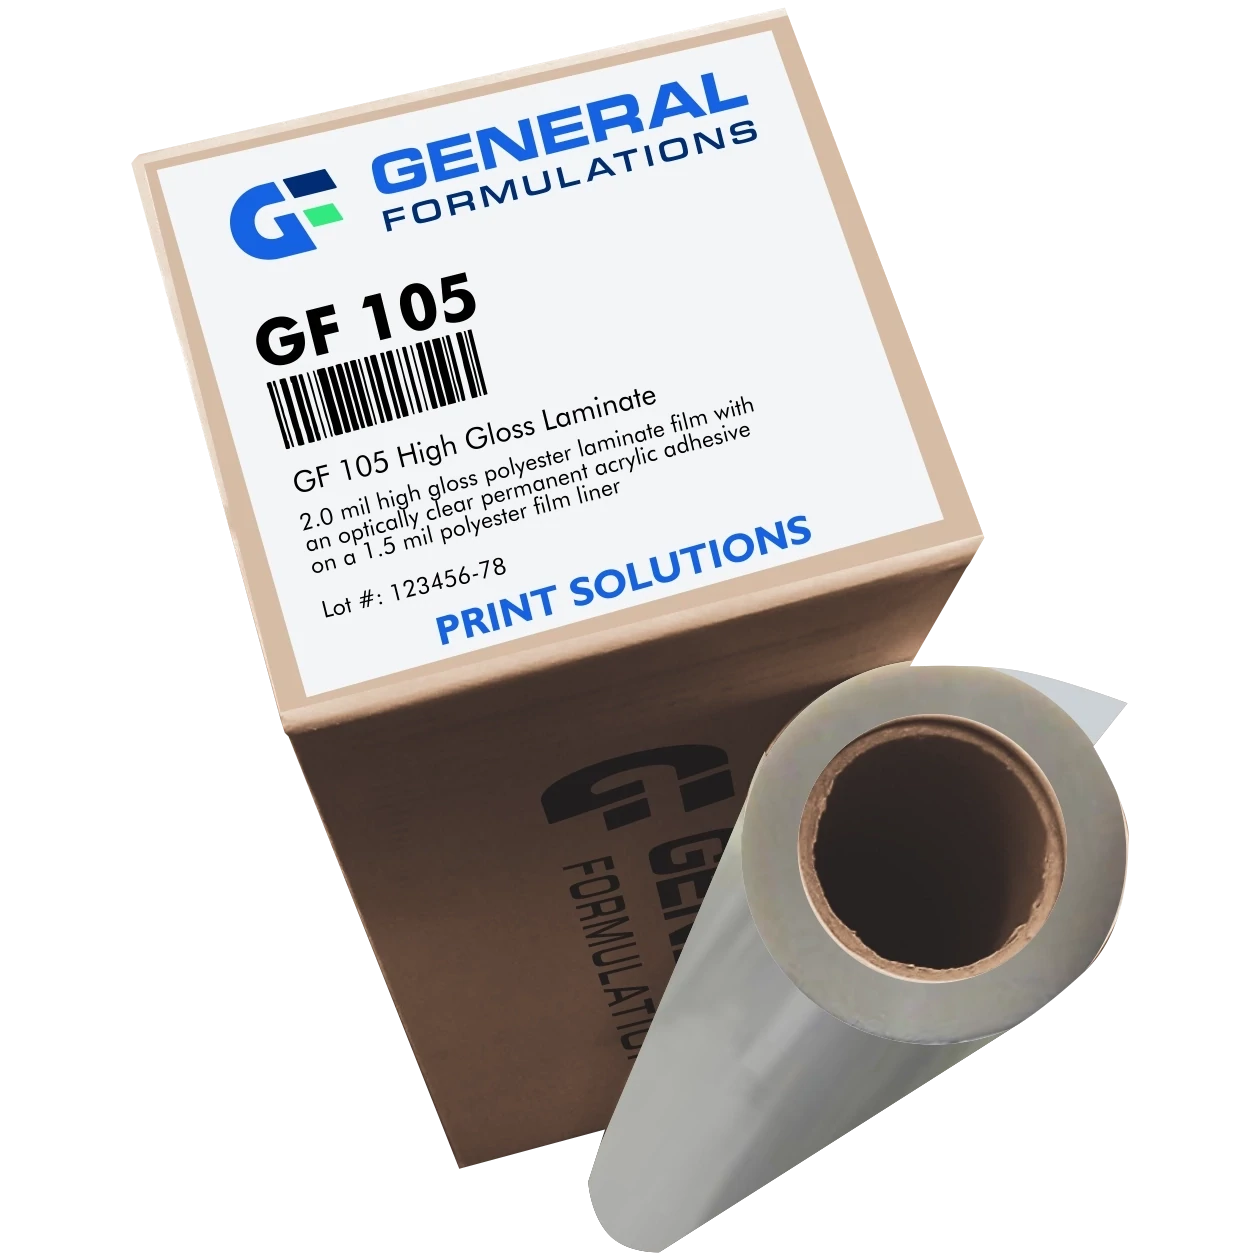 General Formulations 105 High Gloss Clear Polyester Laminate - Permanent, Select Size: 31" x 150'